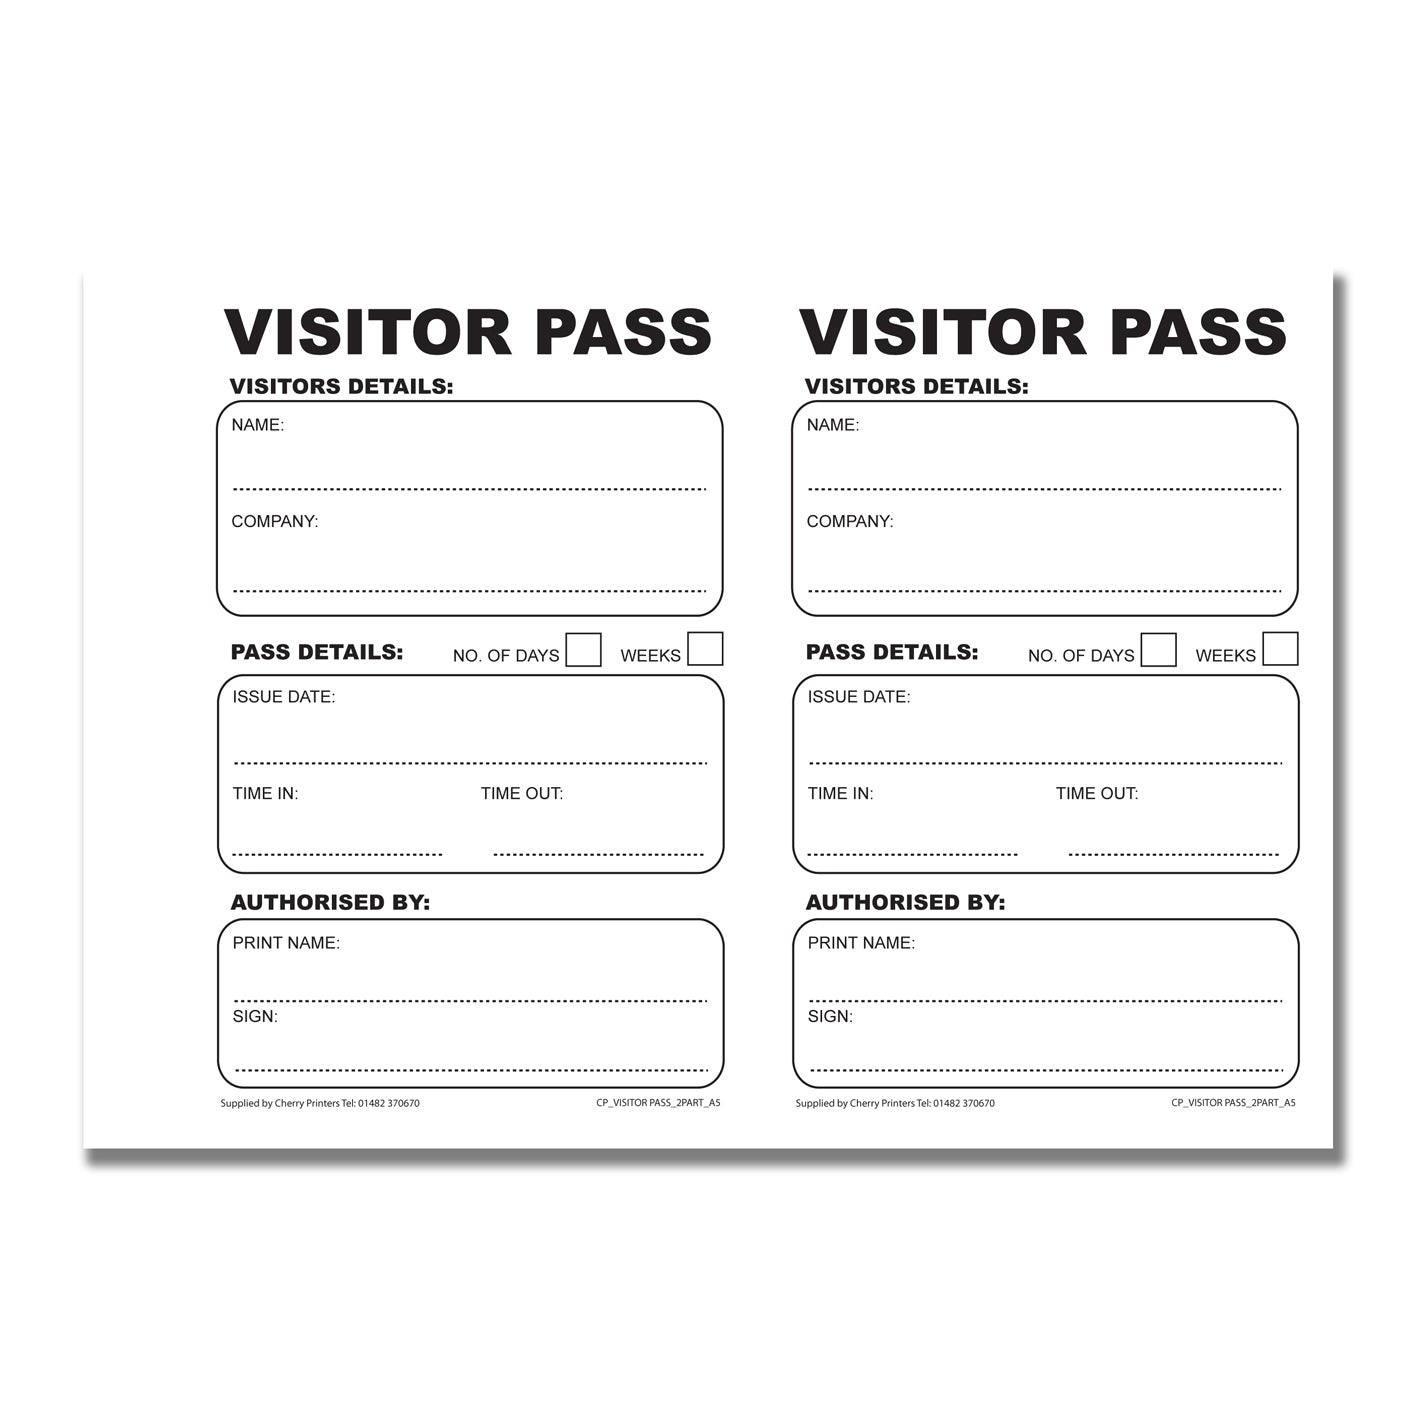 NCR Visitor Pass Duplicate Book A5 50 sets 100 passes per book